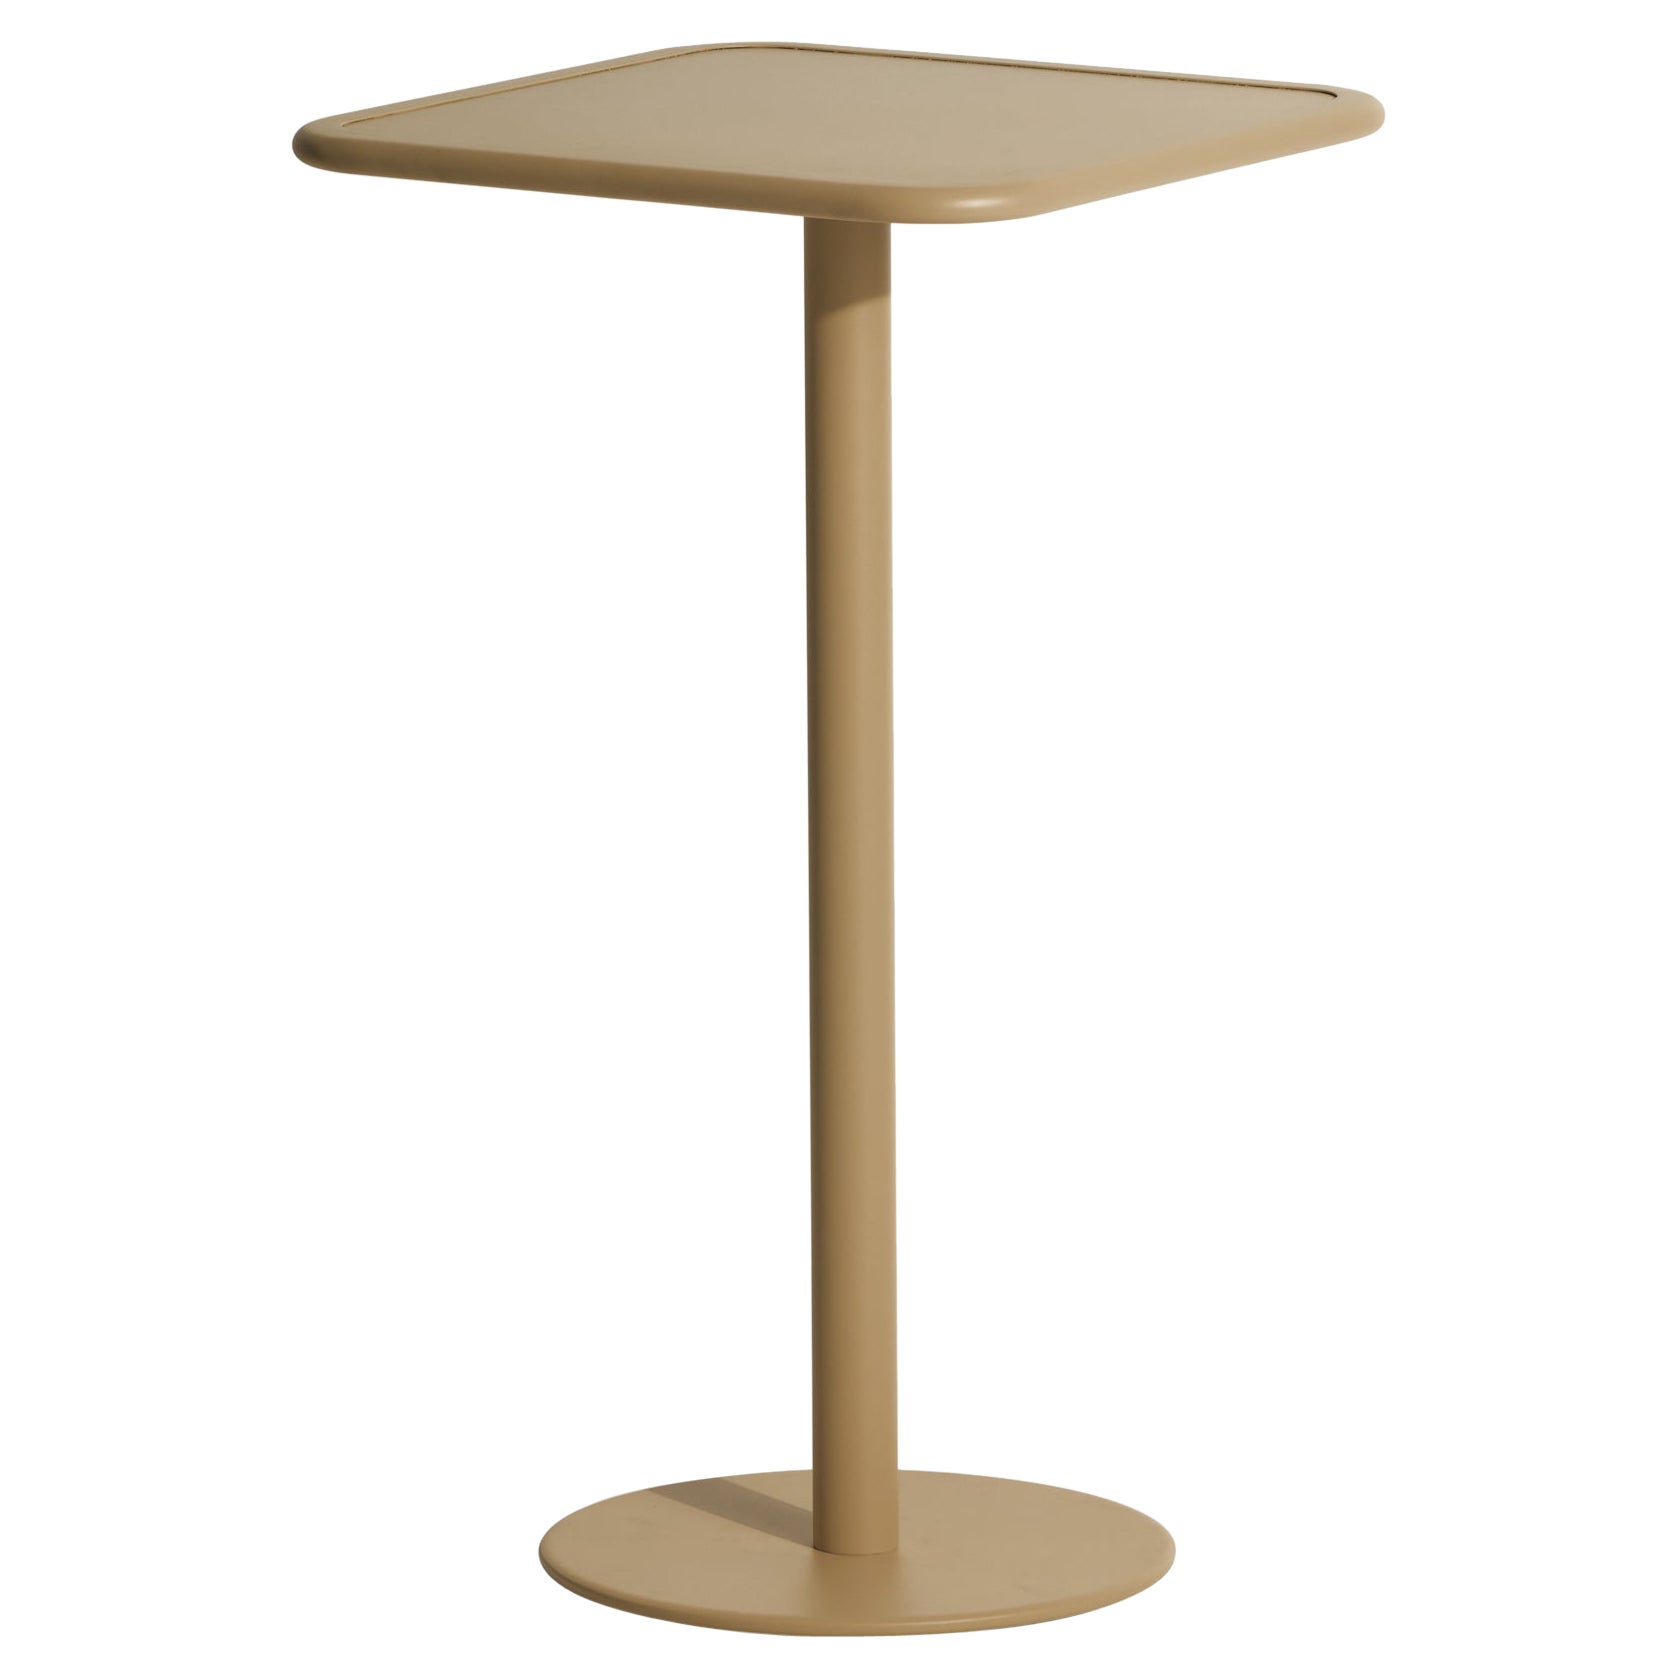 Petite Friture Week-End Square High Table in Gold Aluminium, 2017 For Sale